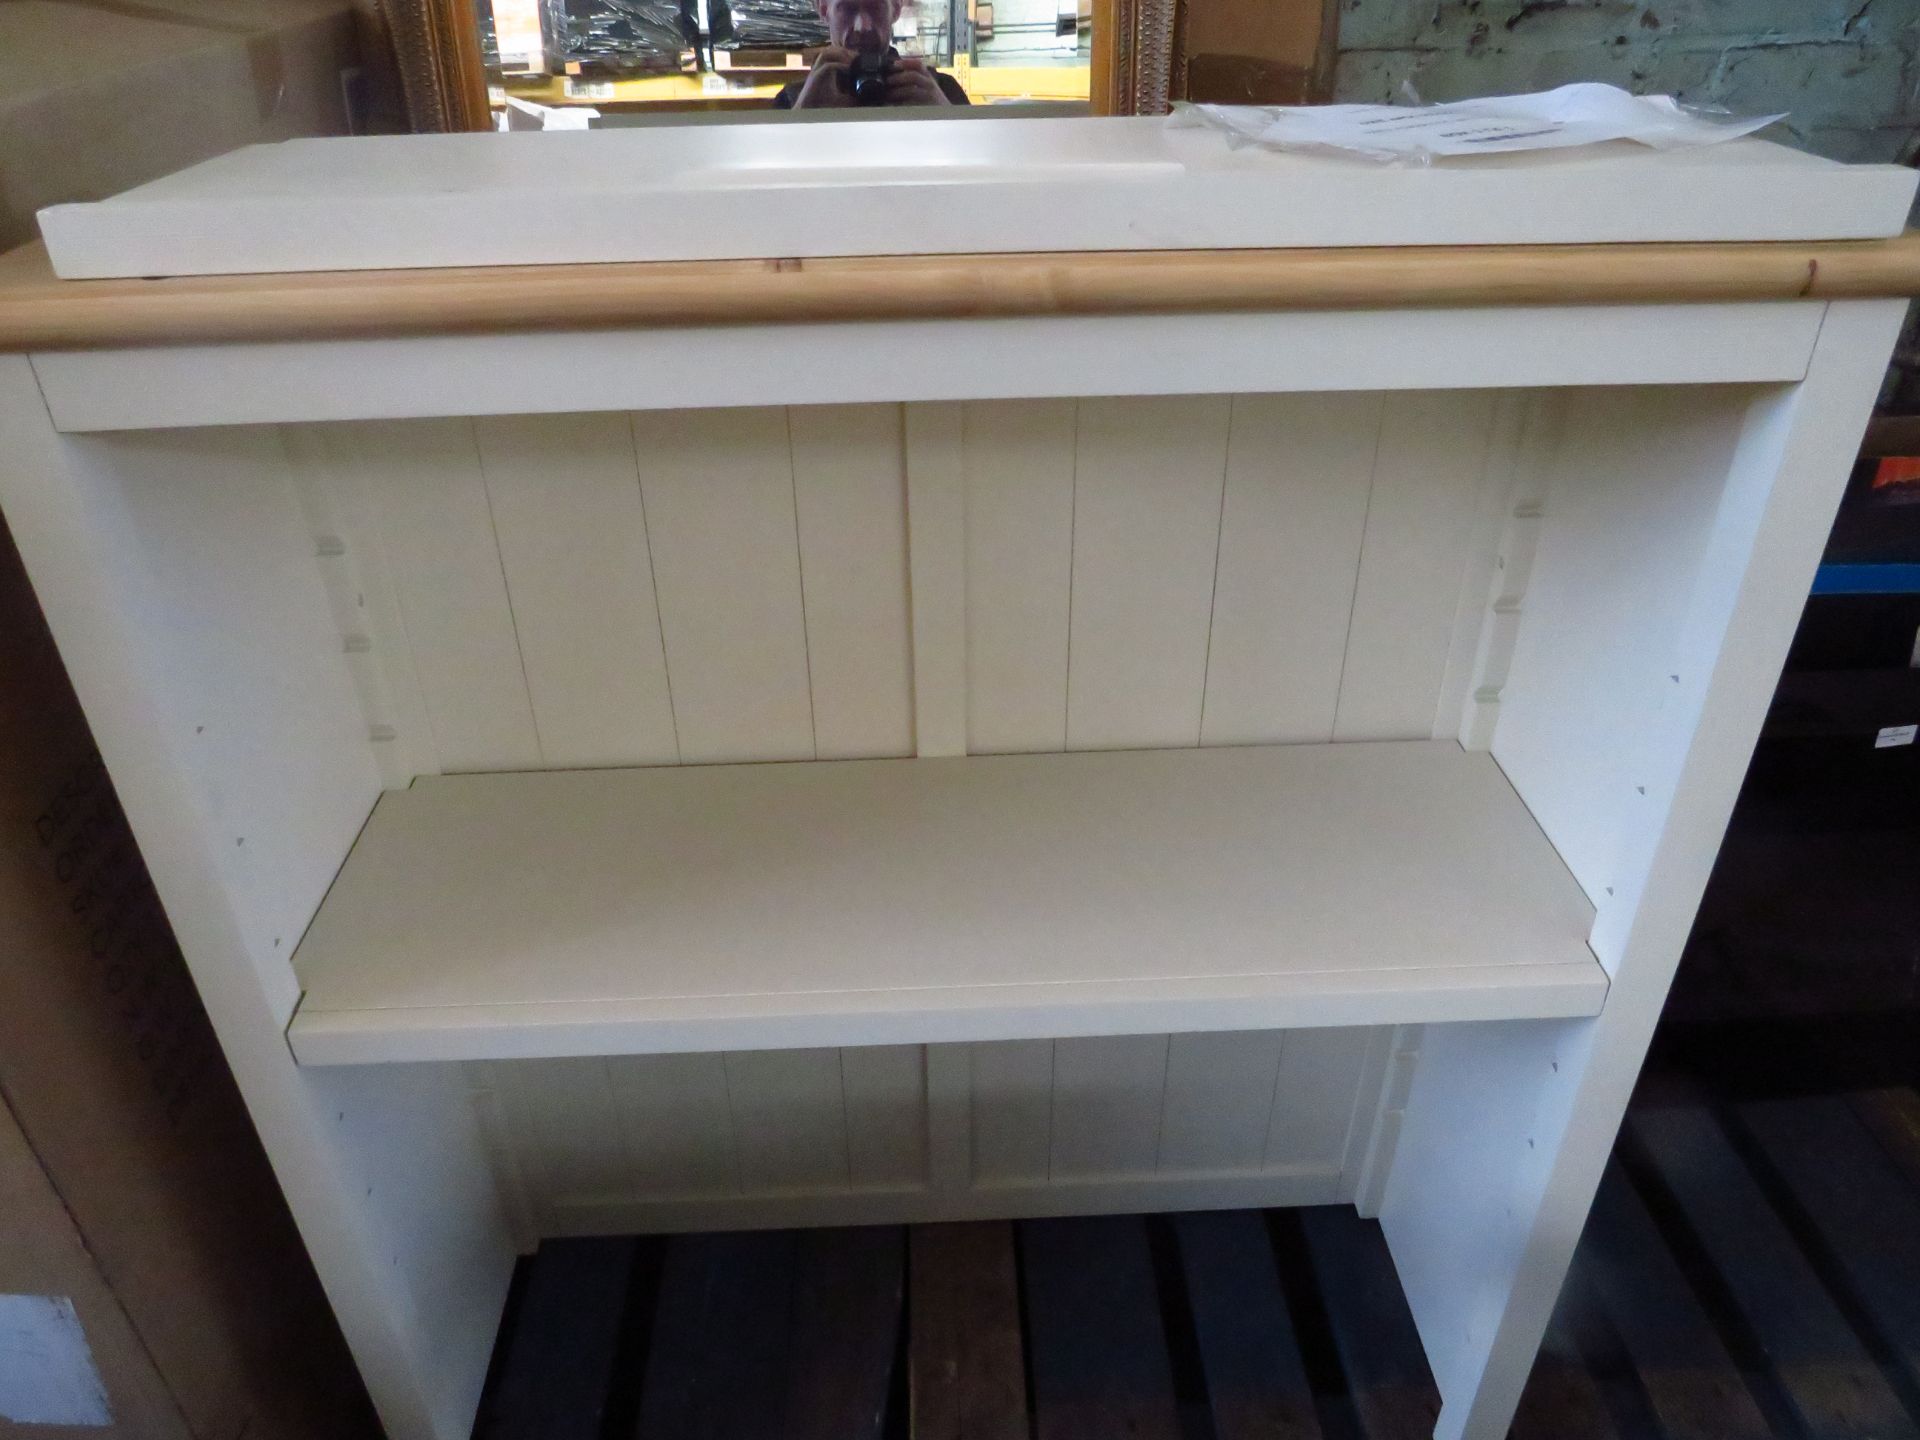 Cotswold Company Painswick Cotswold Cream Small Farmhouse Dresser Top 1 RRP Â£270.00 - The items